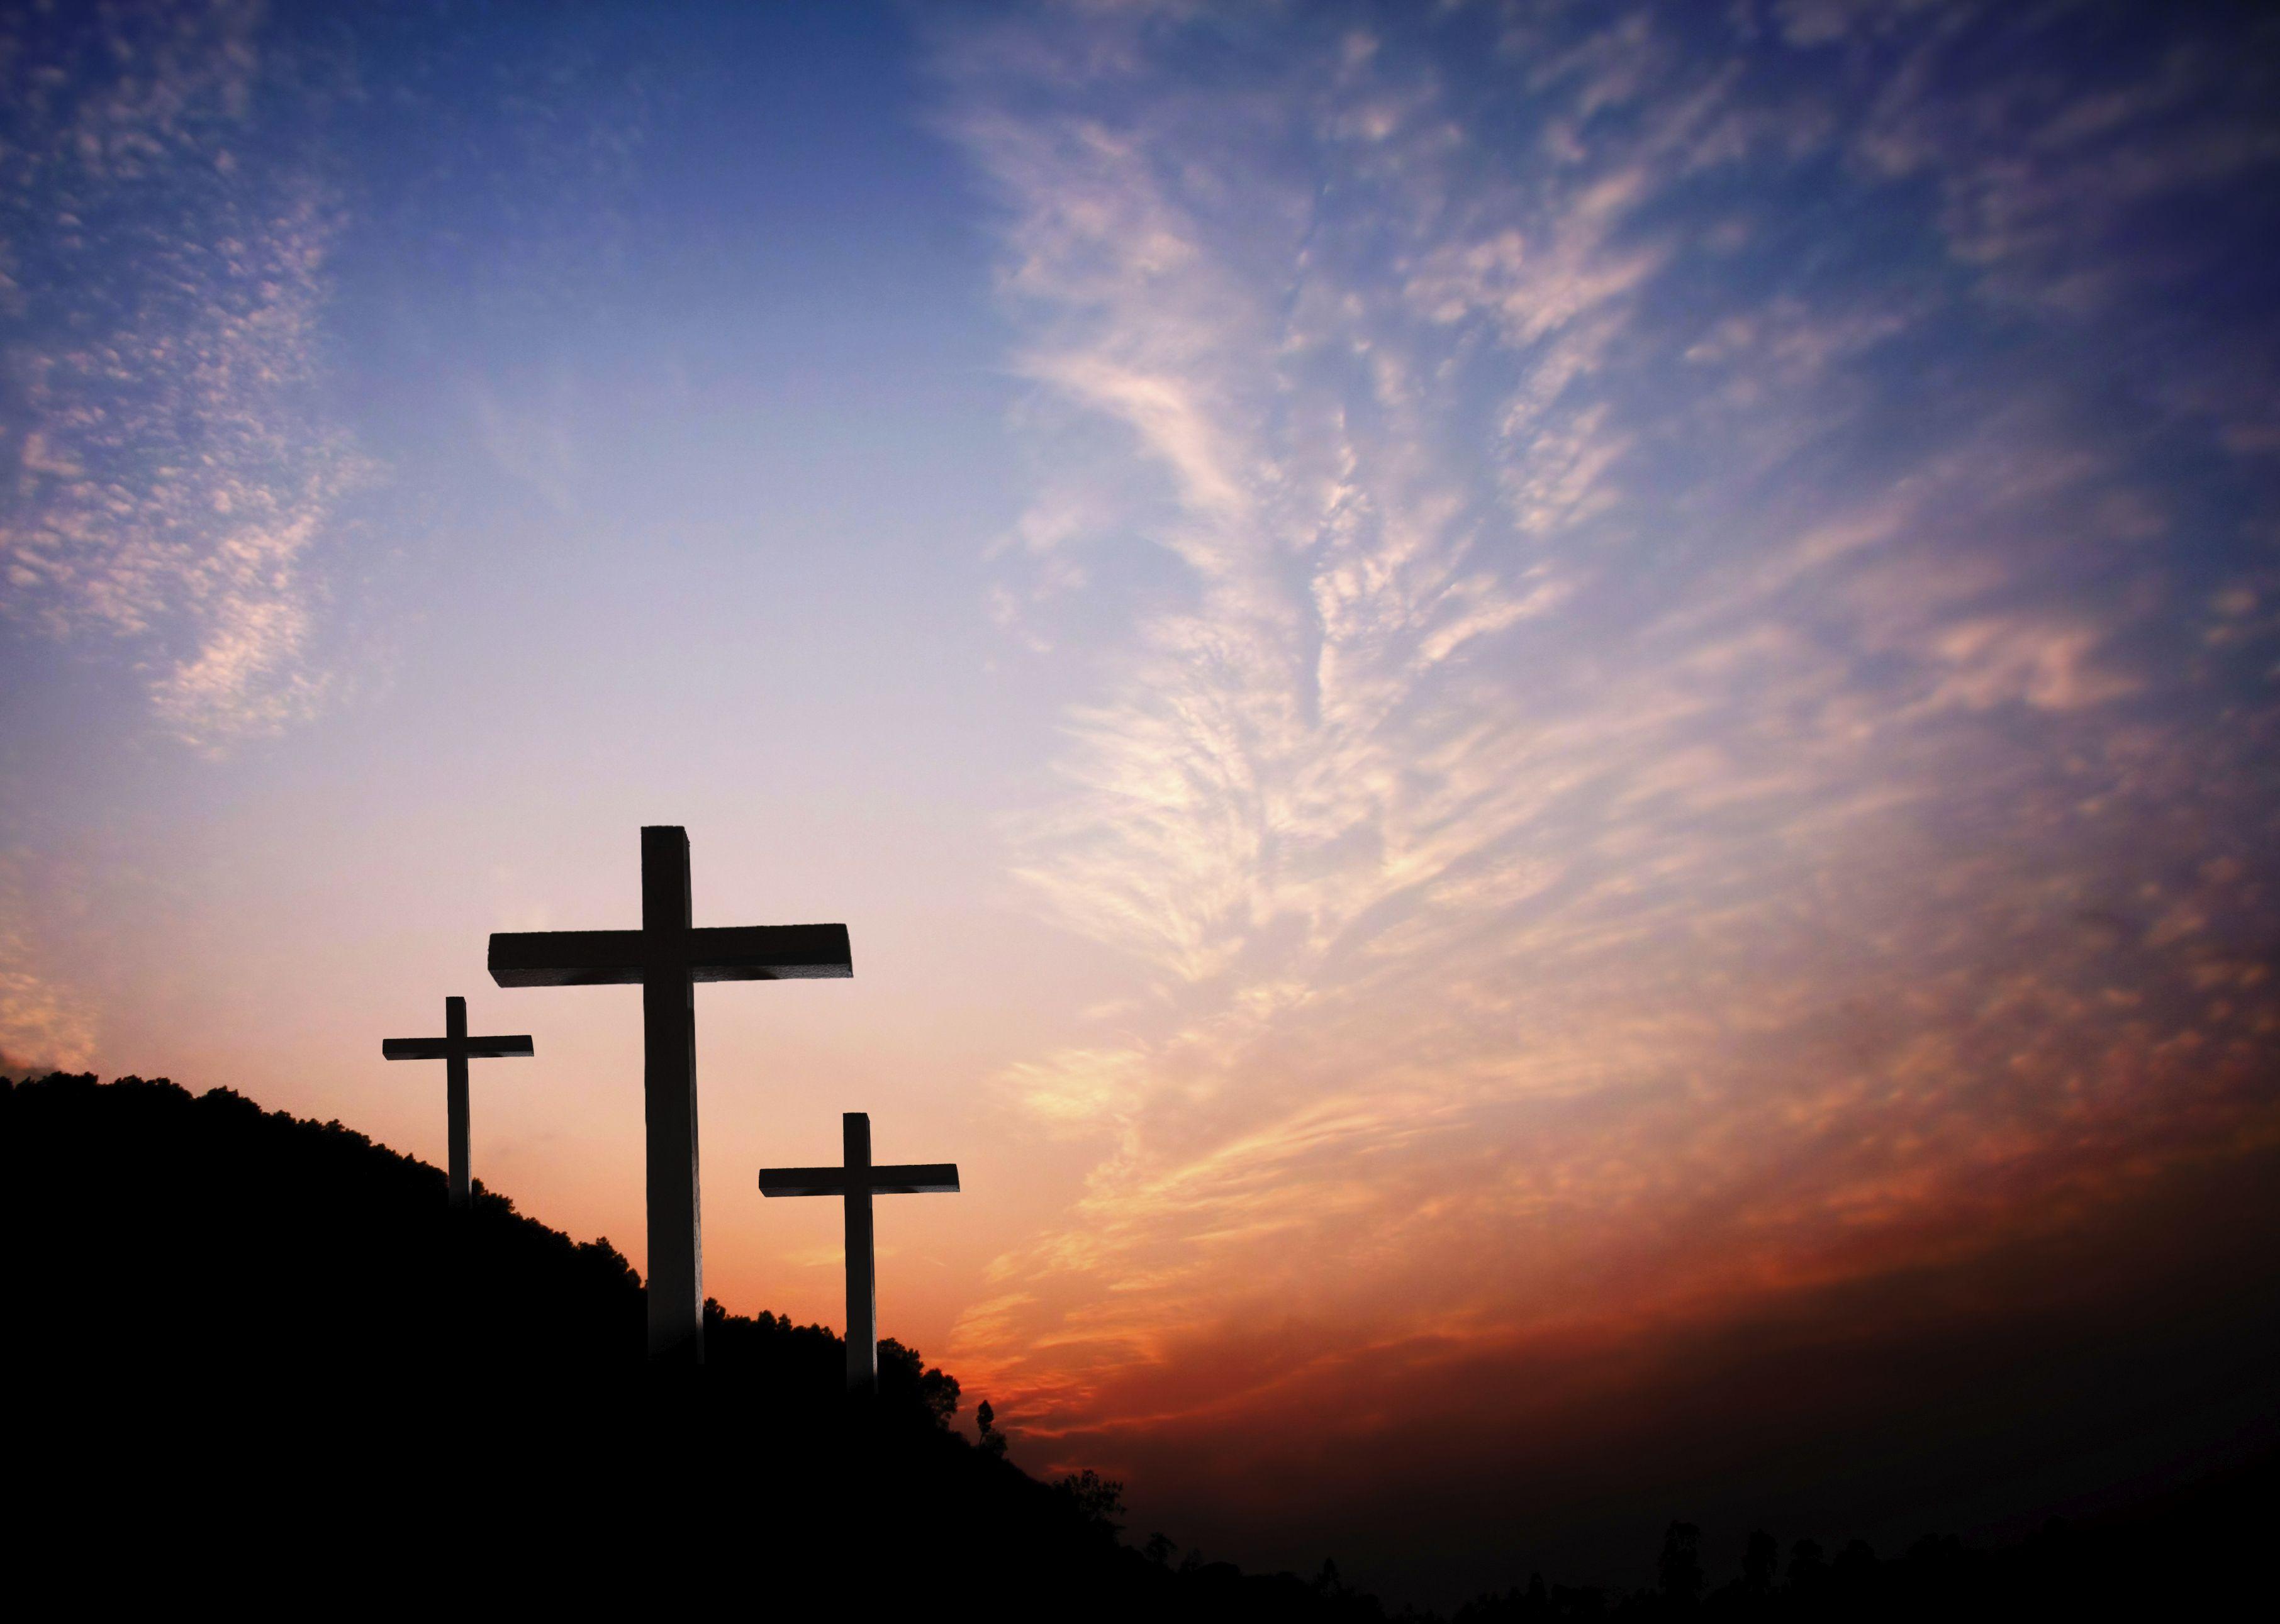 Hd Wallpapers For Good Friday Wallpapers Images Good Friday Wishes